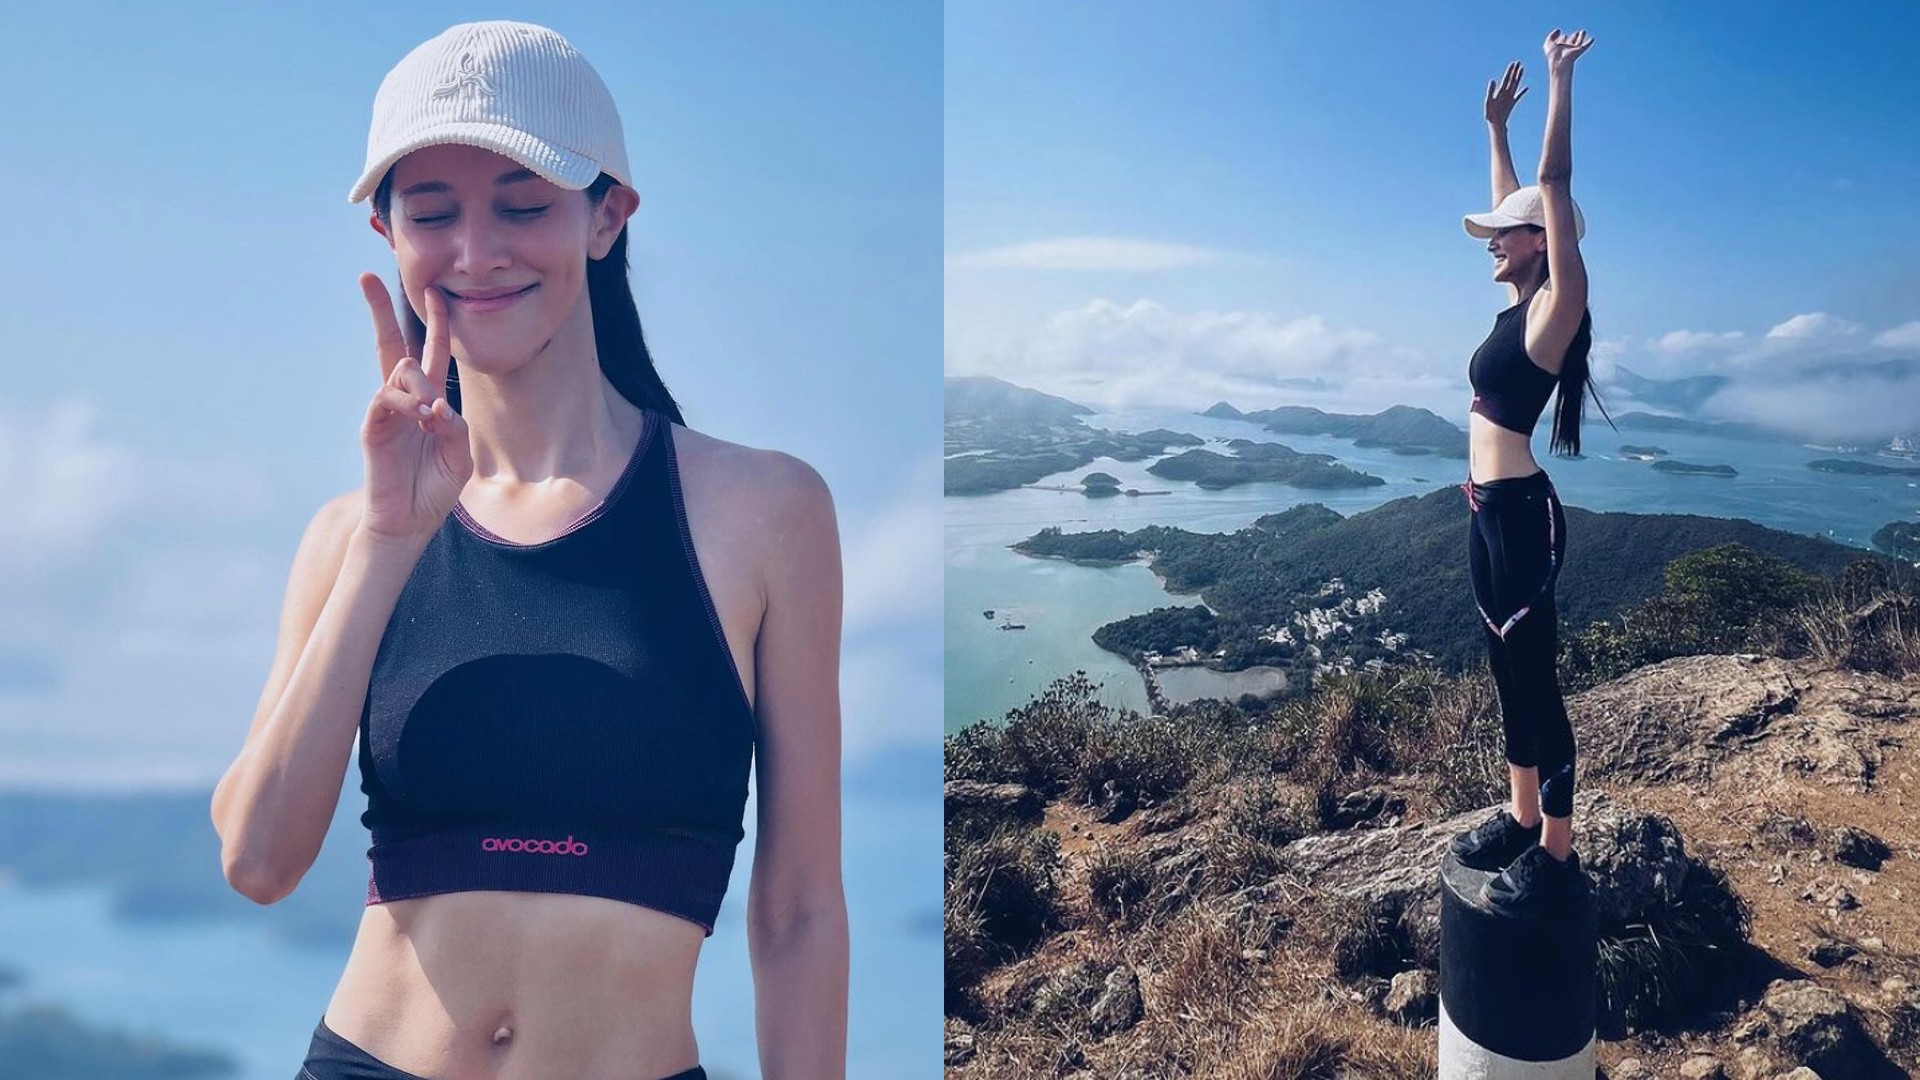 Grace Chan Judged For Wearing Sports Bra And Leggings To Go